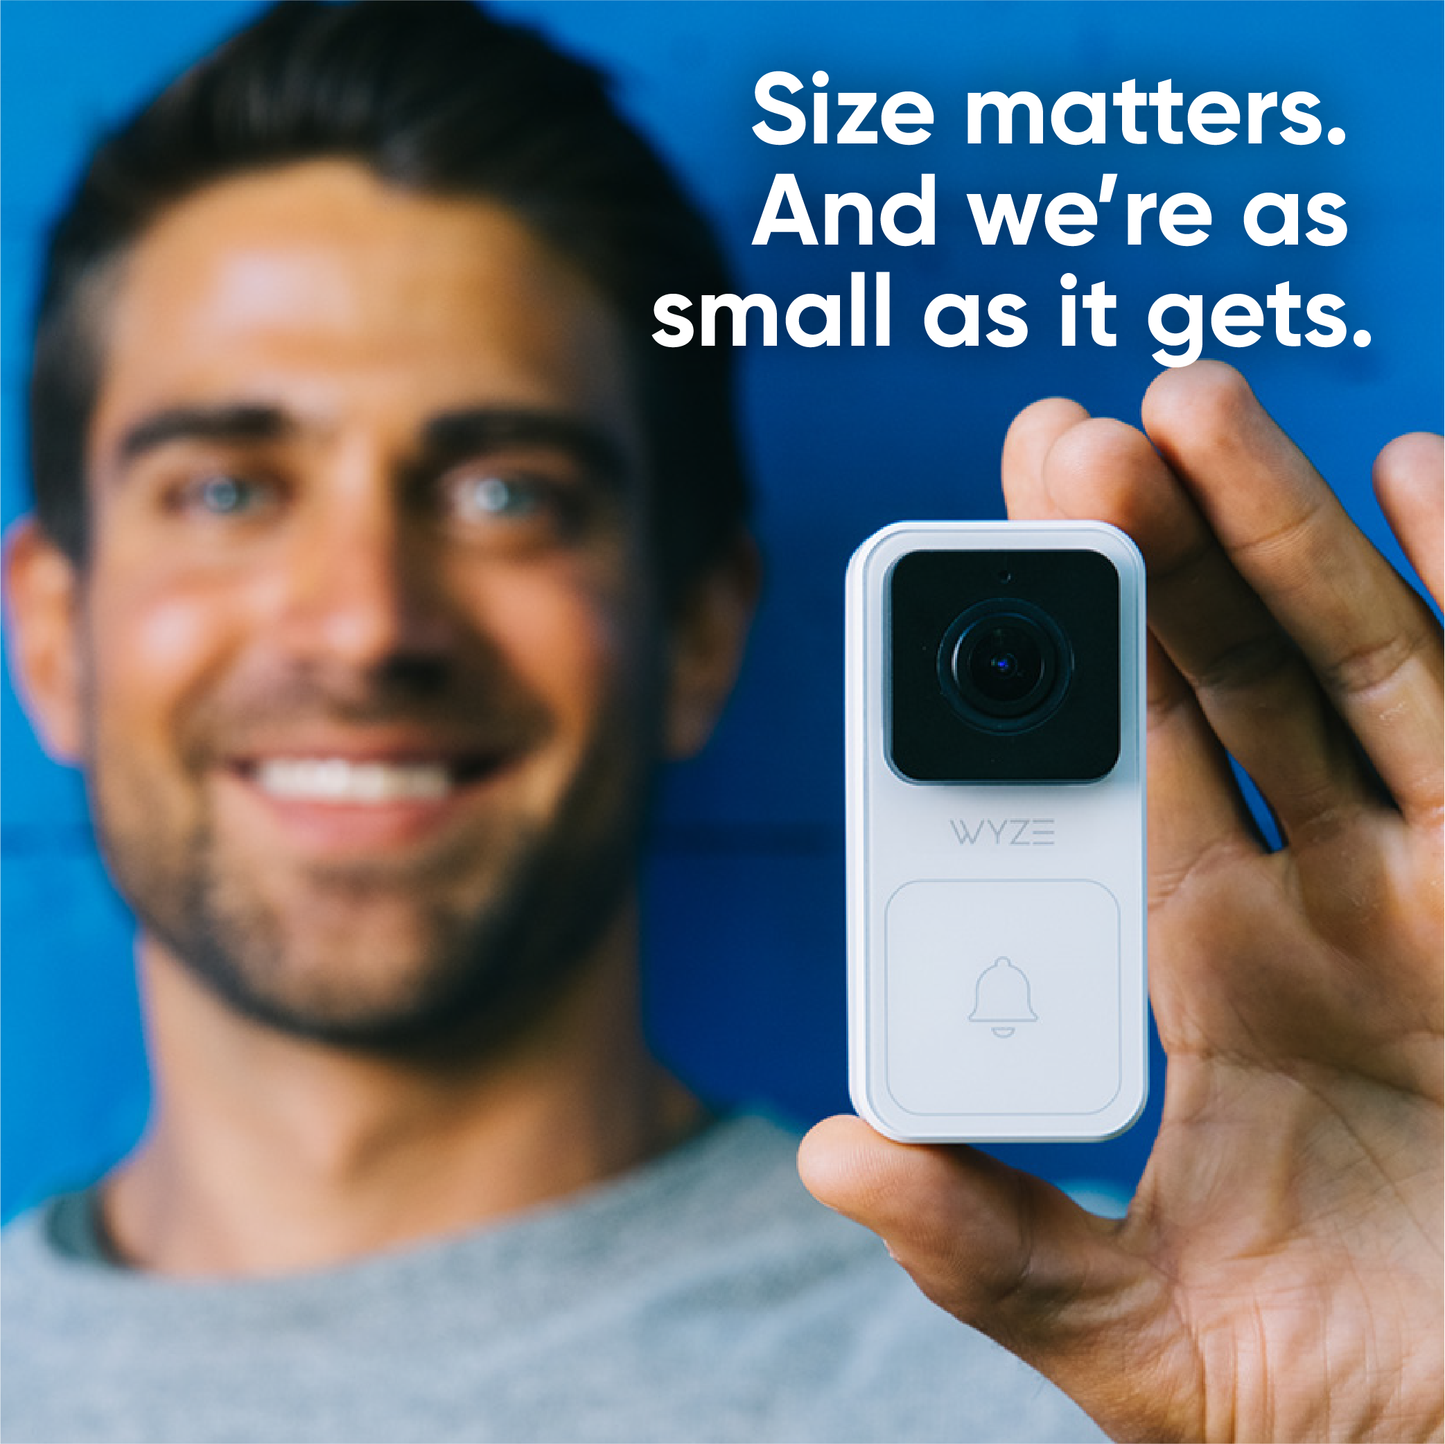 Guy holding Wyze video doorbell in hand. Text overlay "As small as it gets."